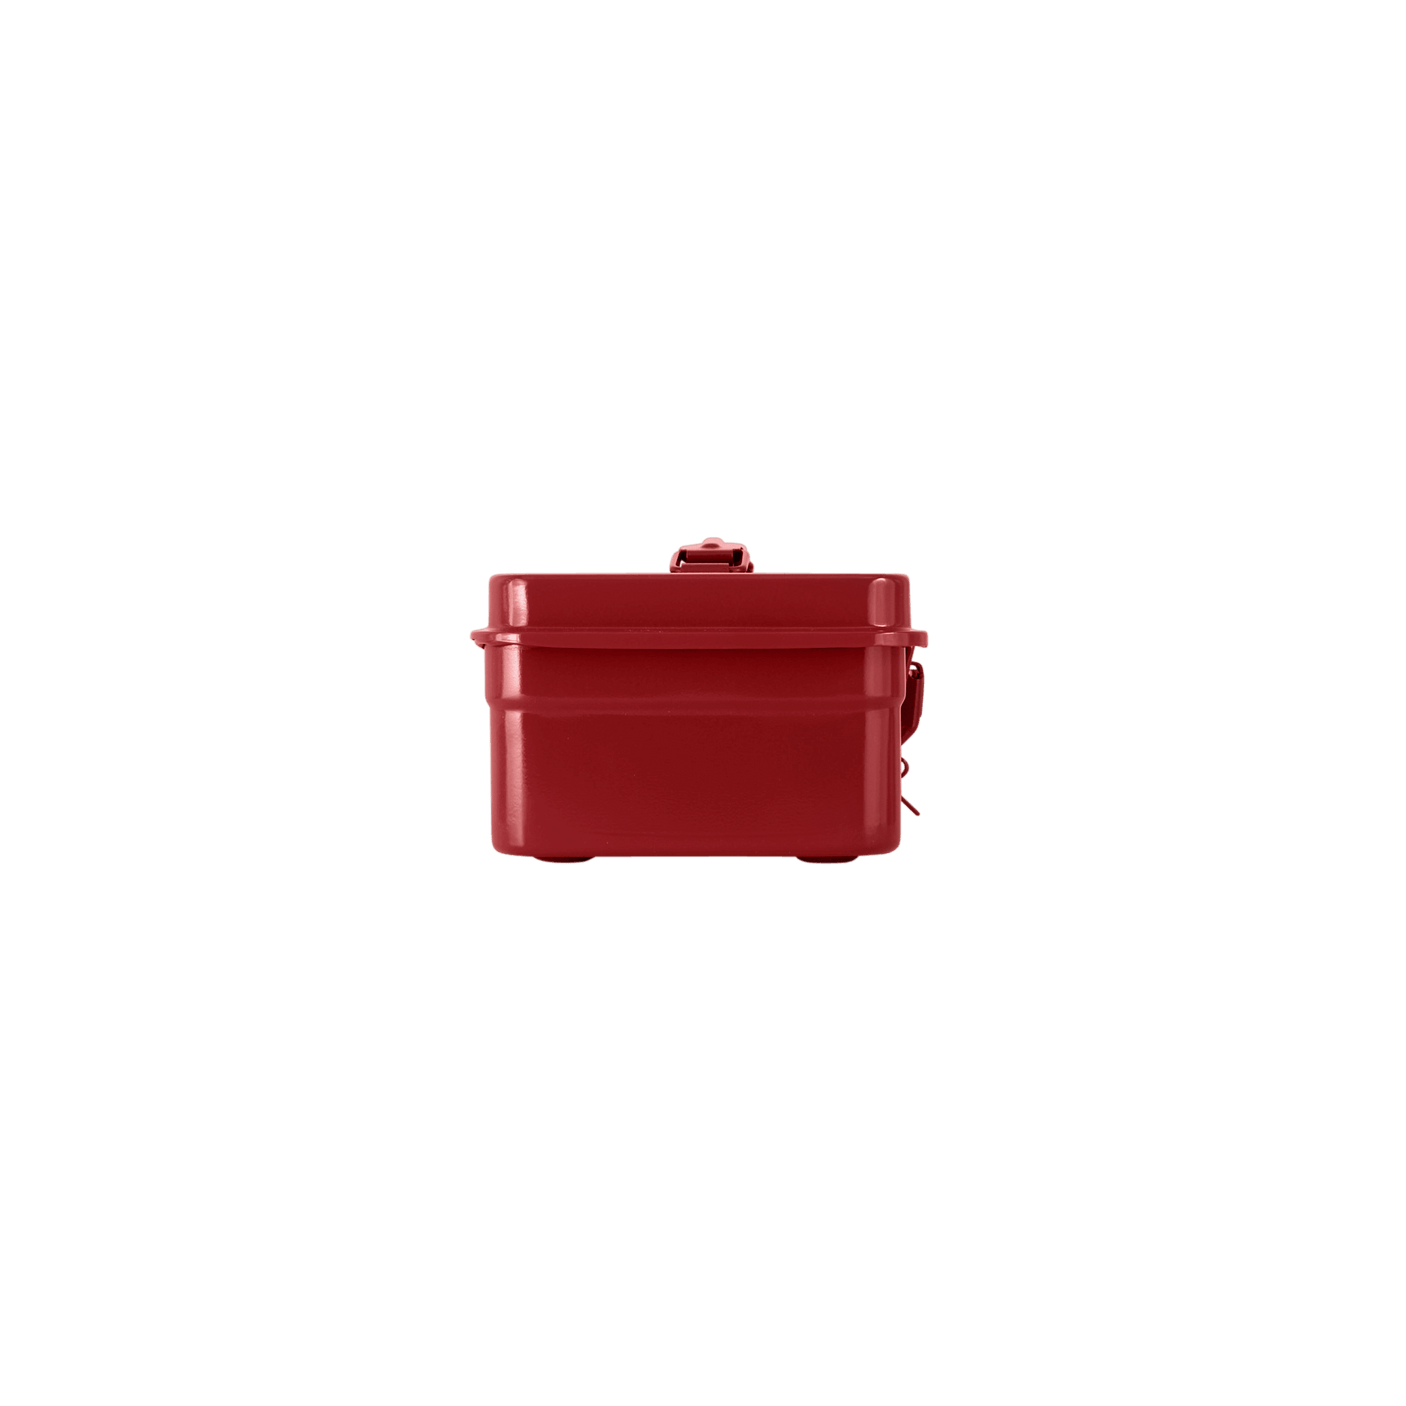 TOYO Trunk Shape Toolbox T-320 R (Red) - Tool Bags Boxes and Rolls - Japanese Tools Australia